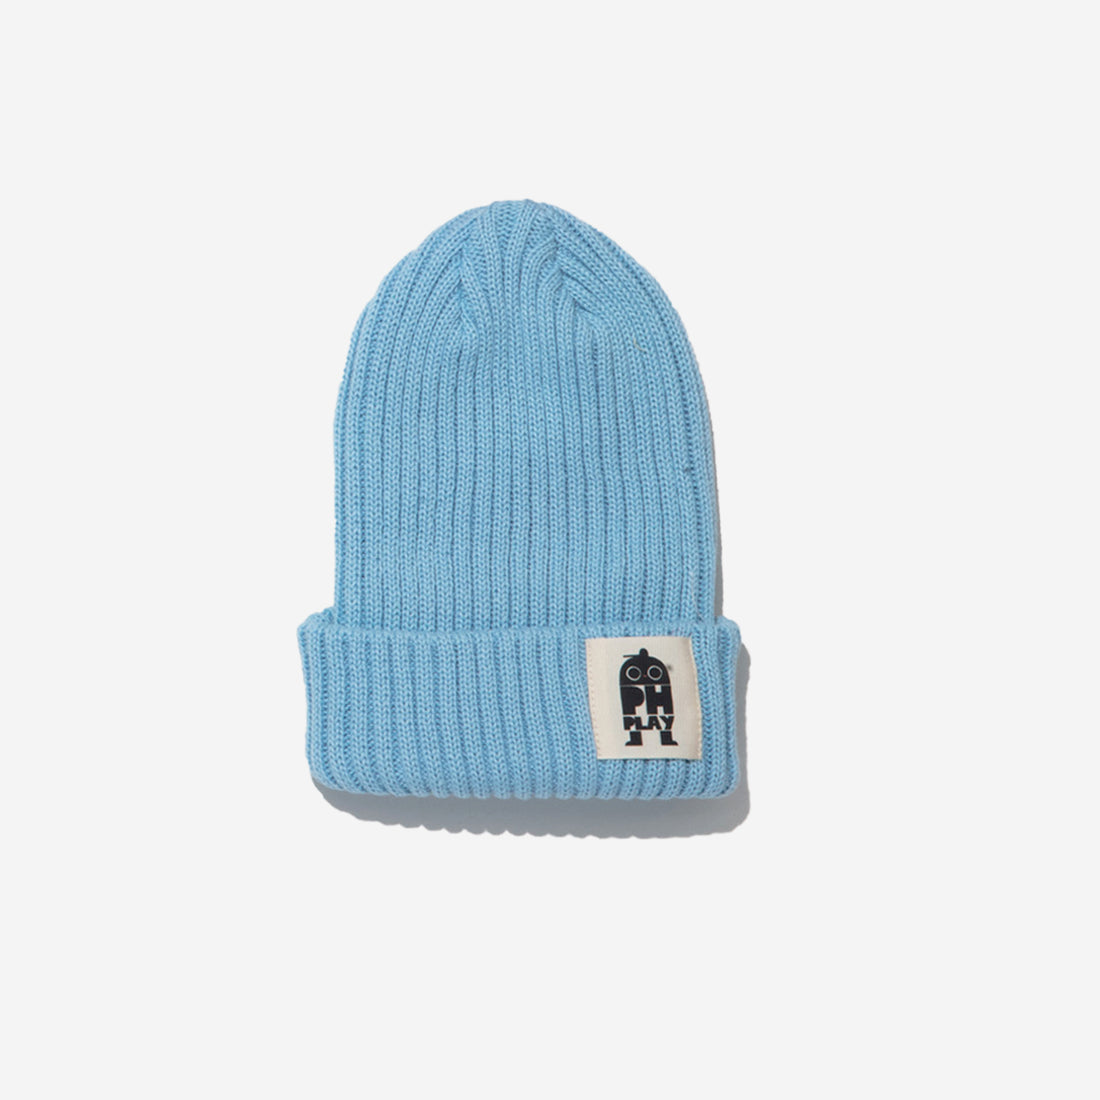 knitted blue hat with black ph play logo on white background